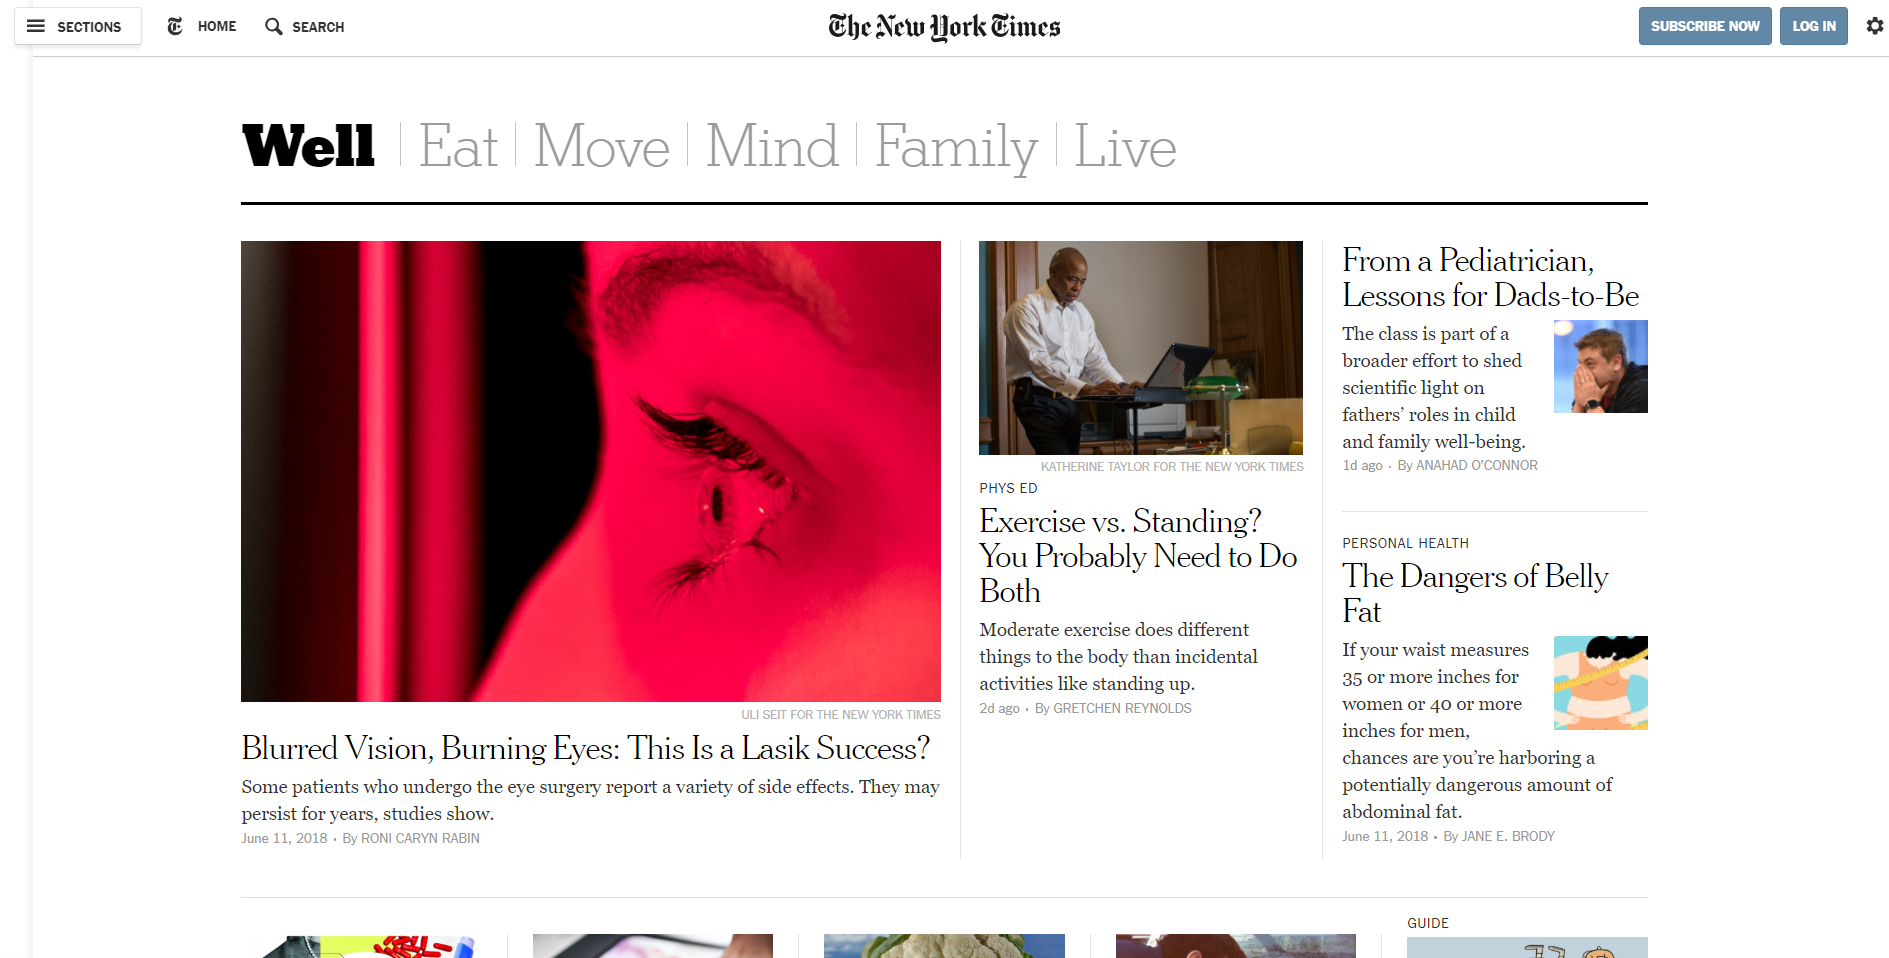 Screenshot of the New York Times Well Section